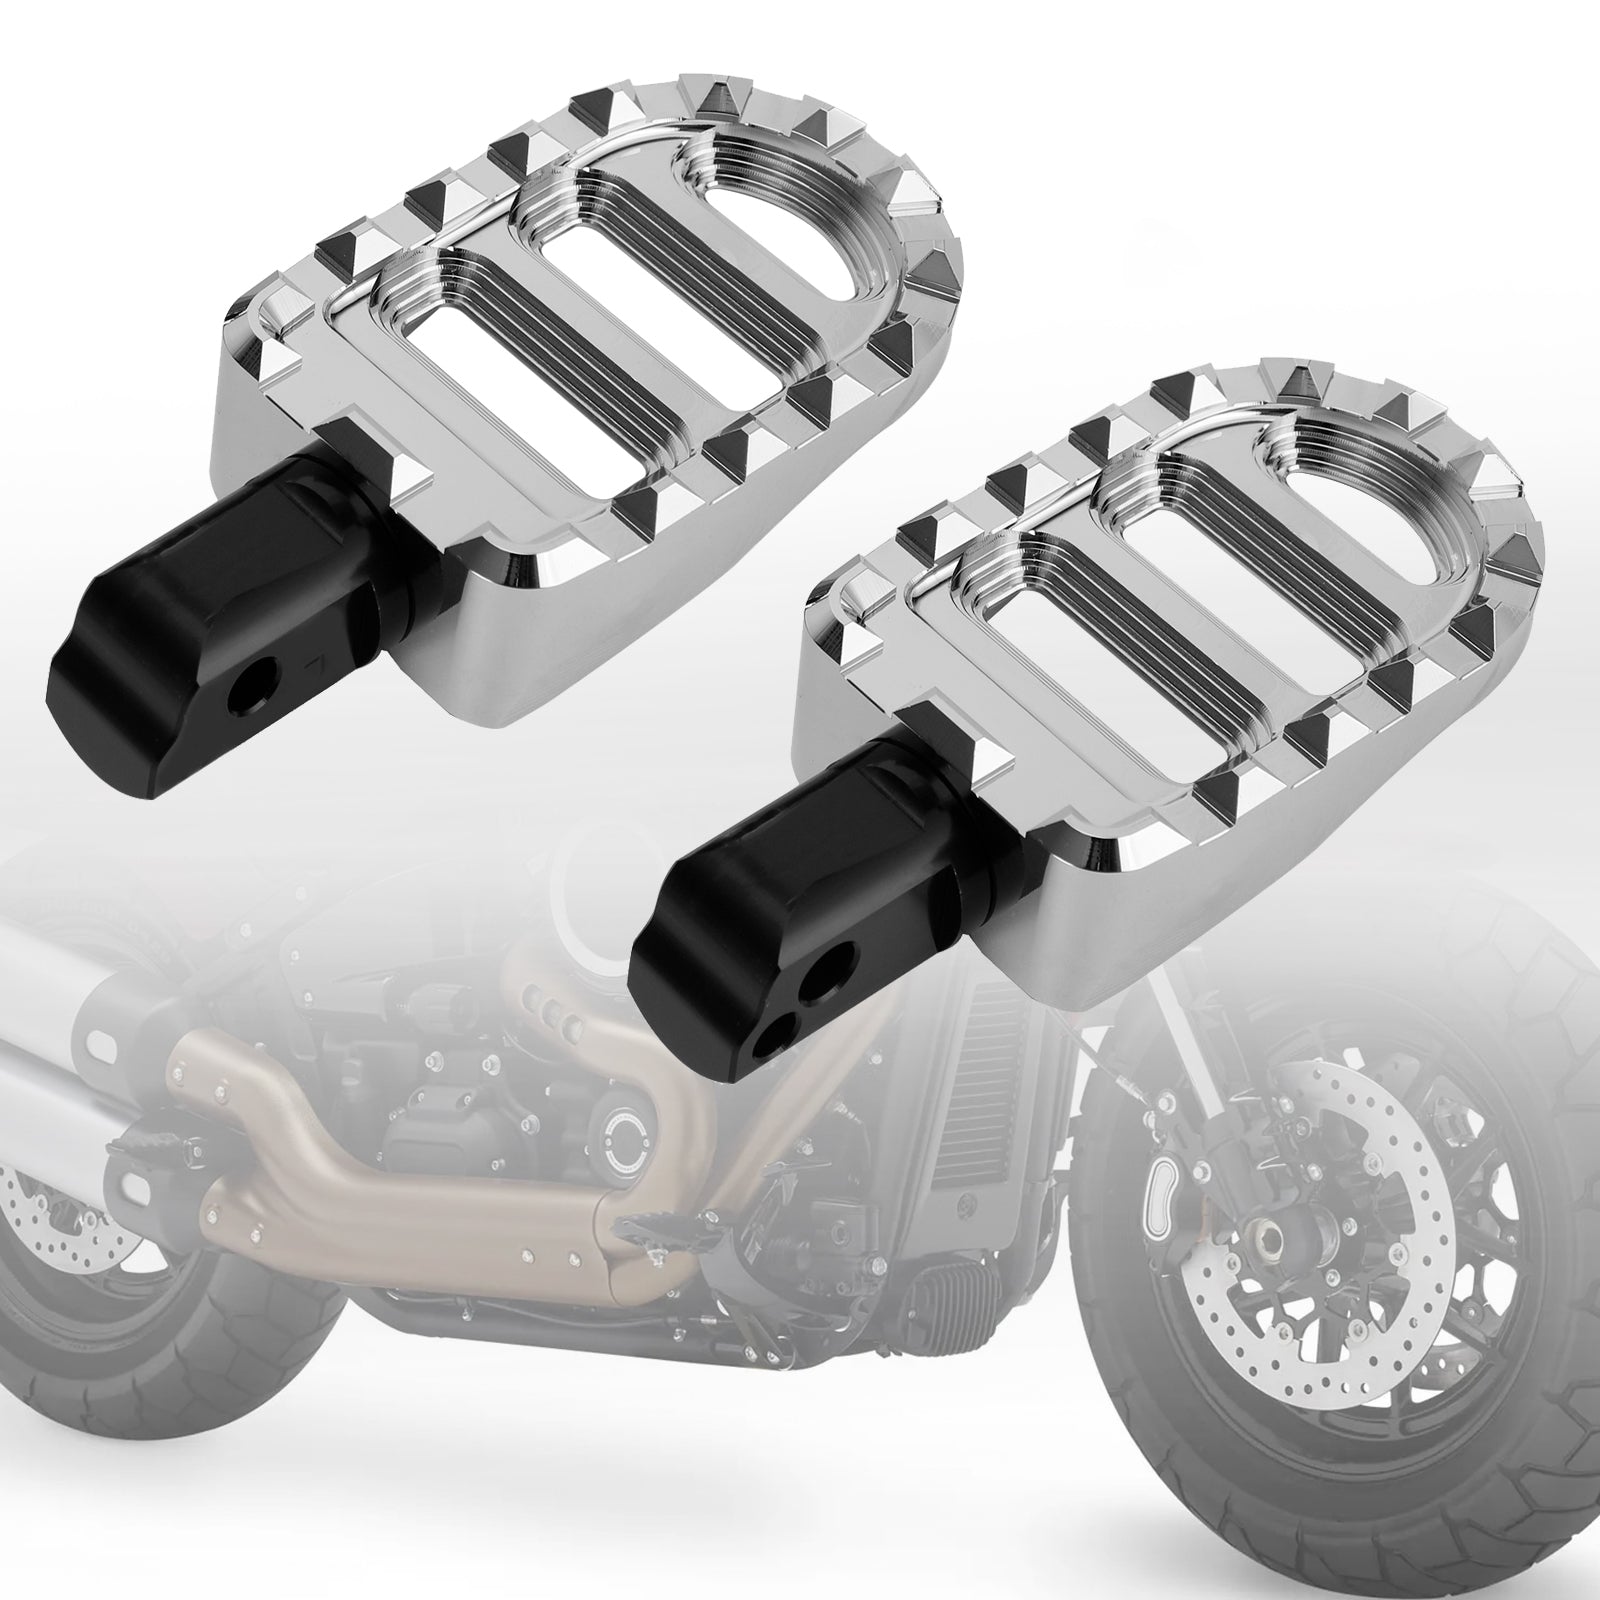 Rear Footrests Foot Peg fit for Sportster S Breakout Lower Rider Softail Slim